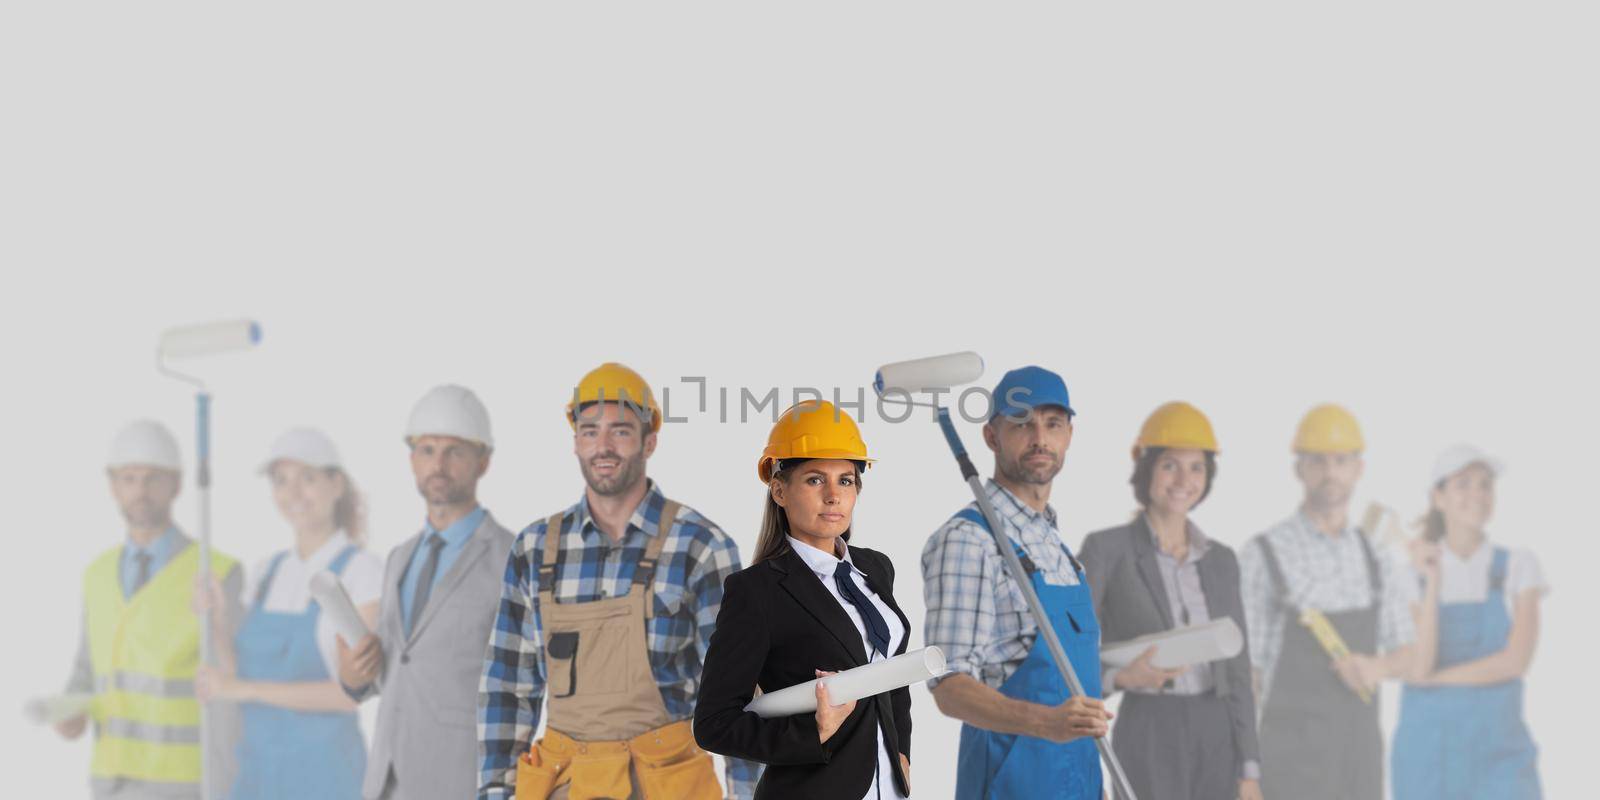 Group of industrial contractors workers people standing together on gray background, unity cooperation teamwork concept